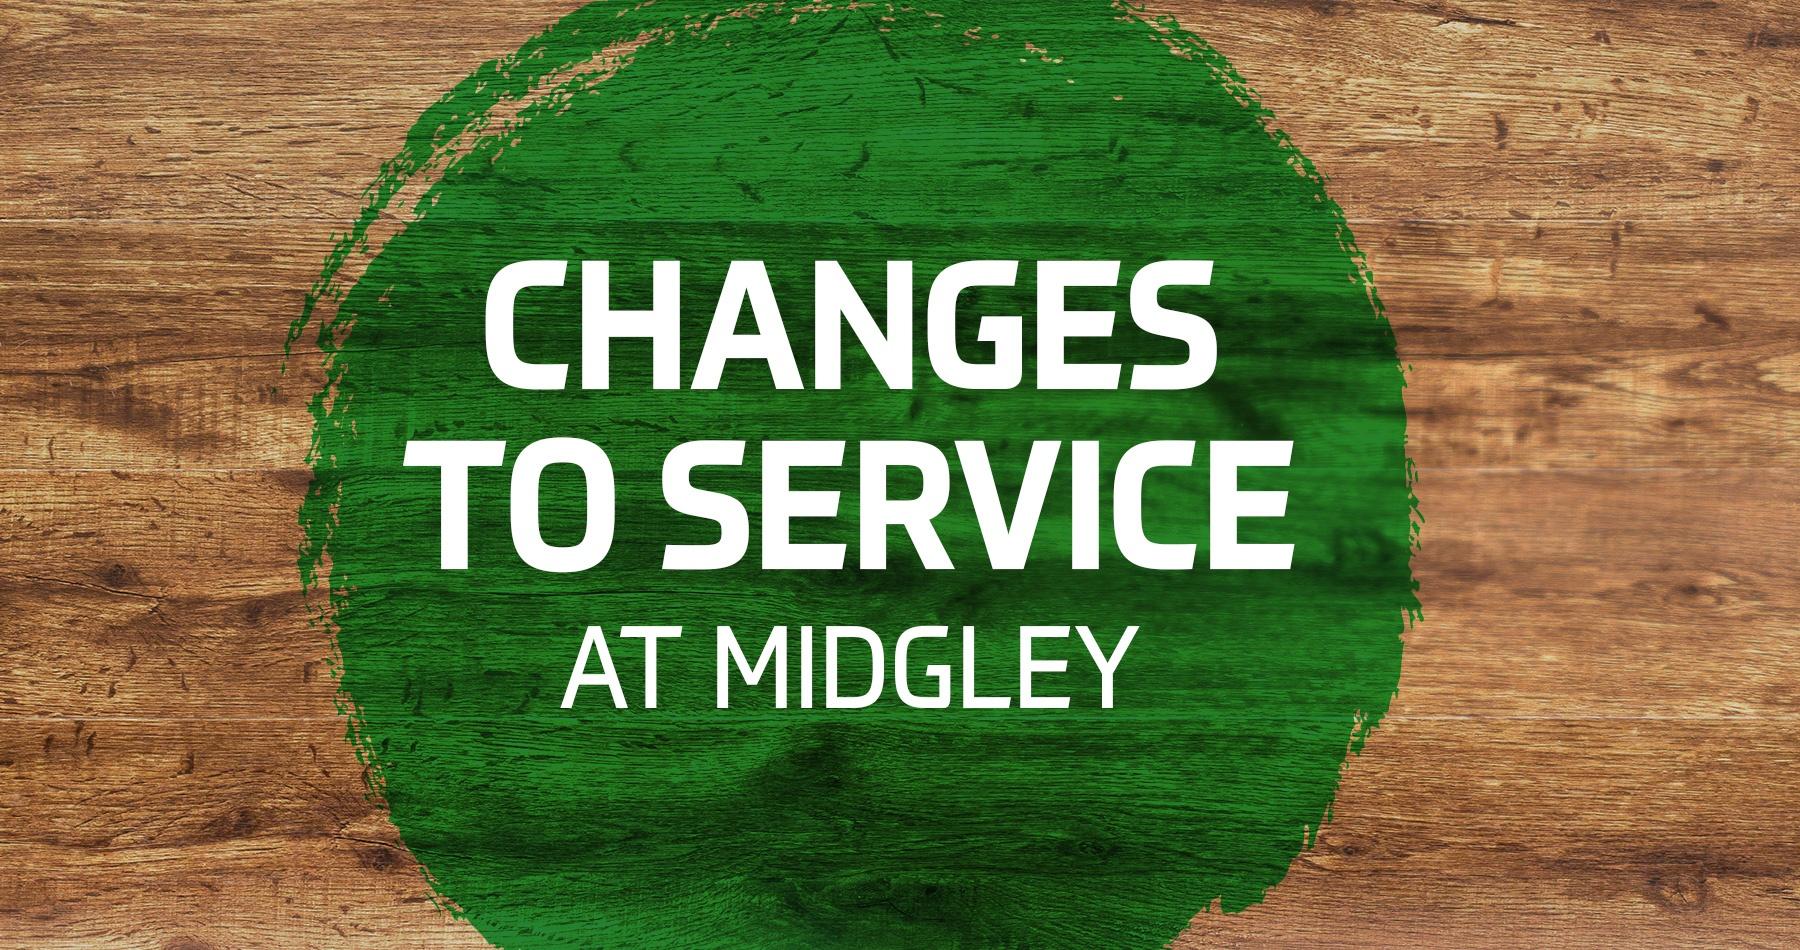 Changes to Service at Midgley